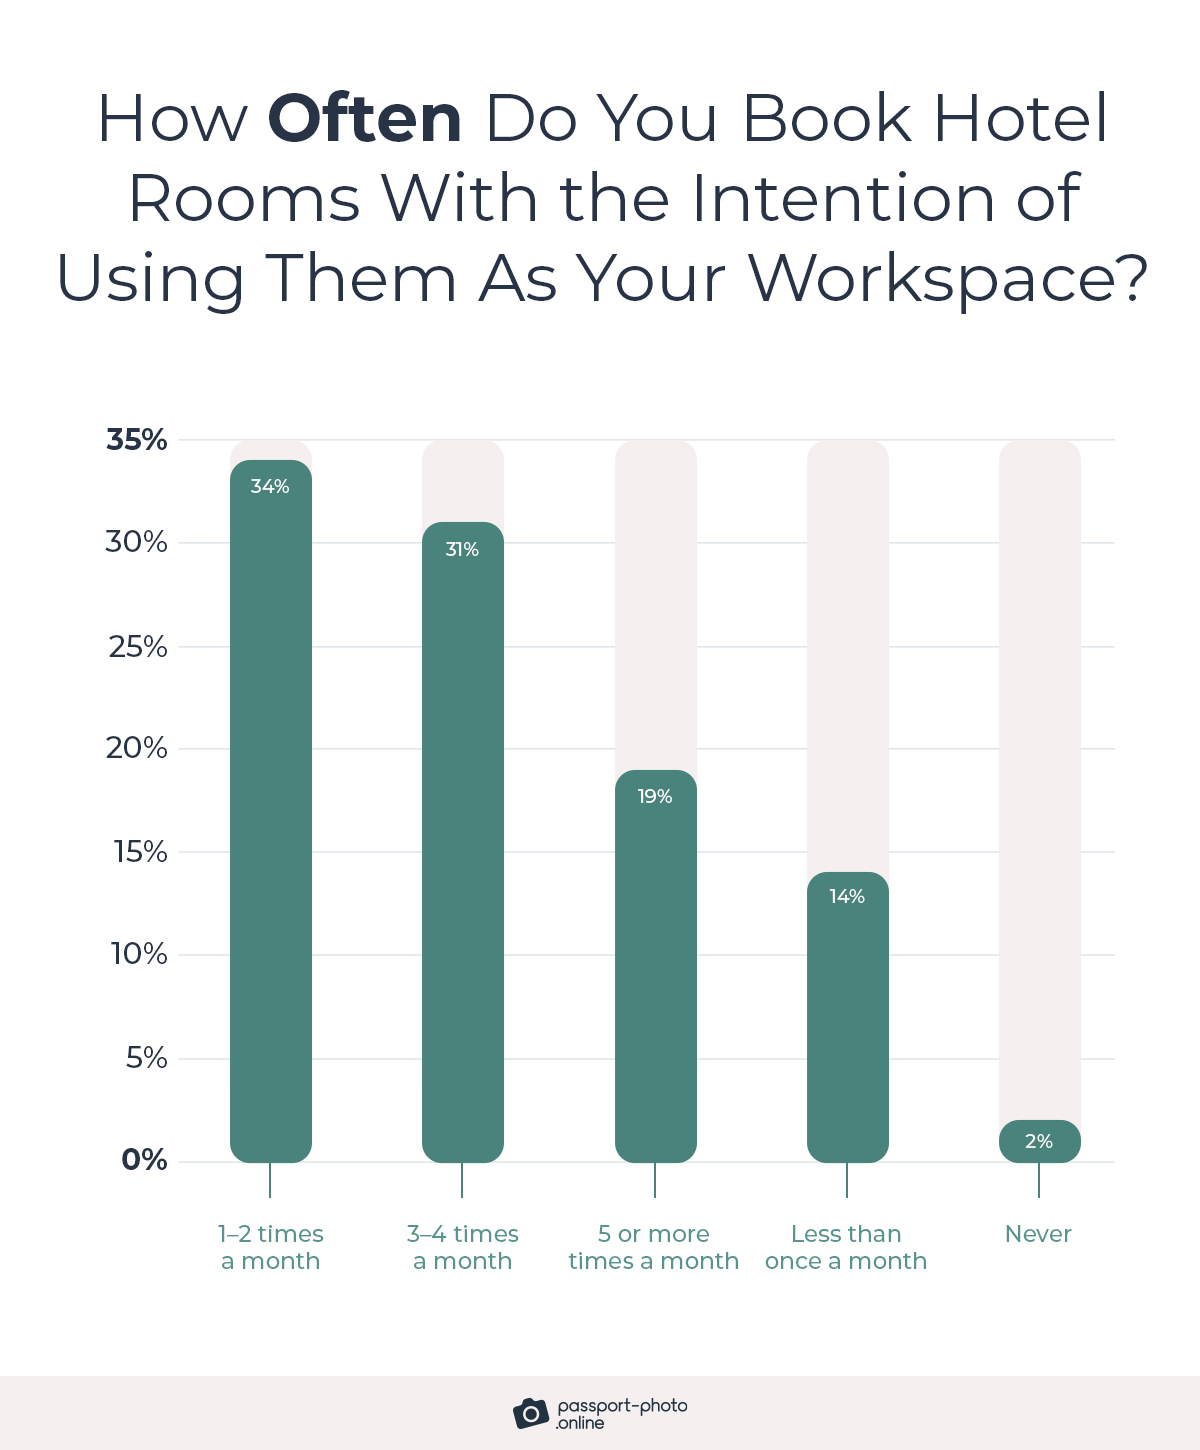 most working professionals (65%) book hotel rooms to use as their workspace 1–4 times a month